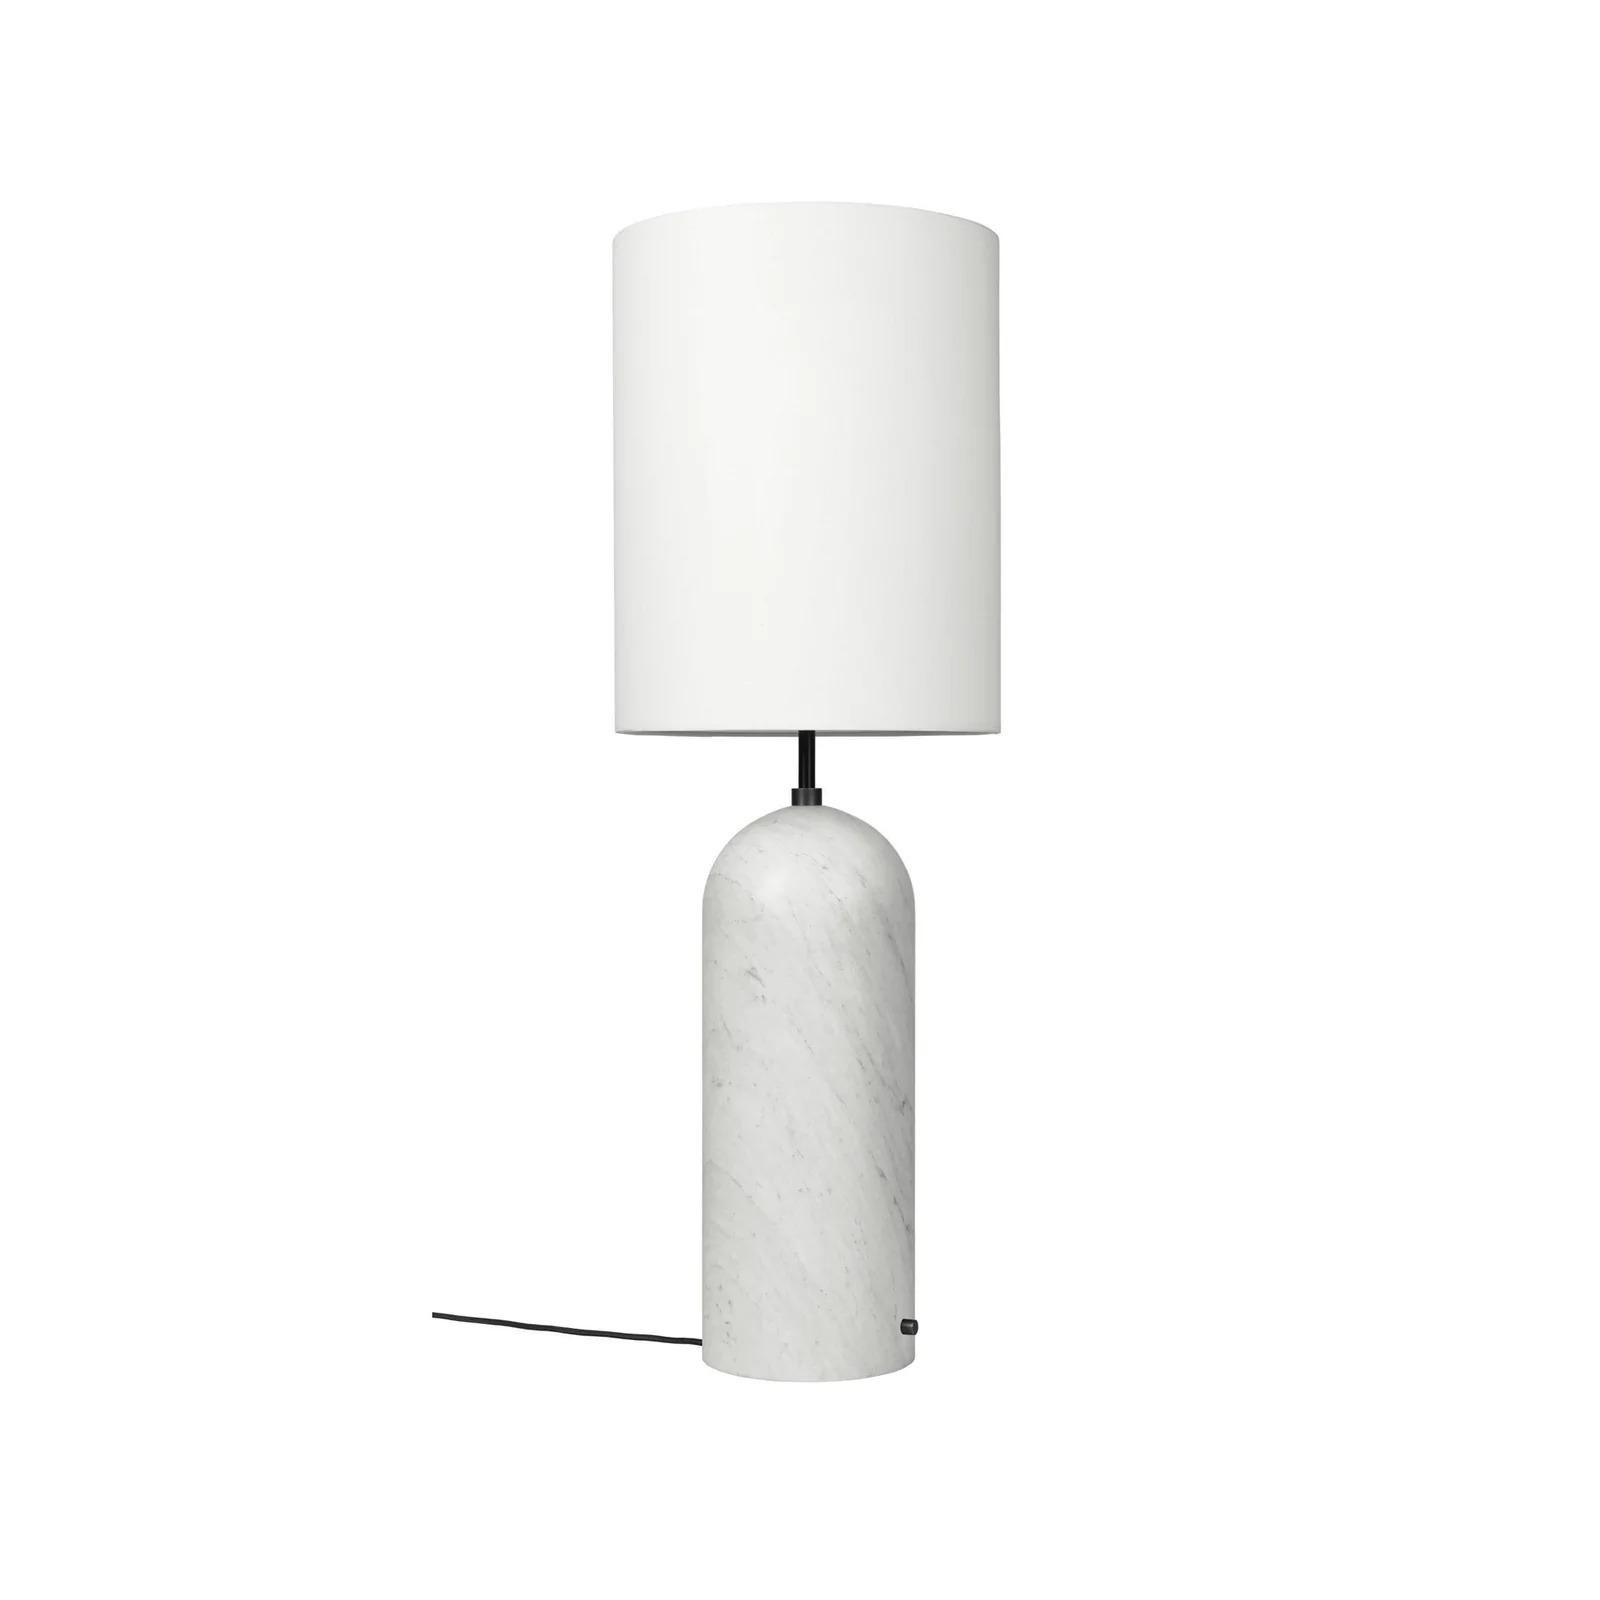 Steel Gravity Floor Lamp - XL High, Grey Marble, White For Sale